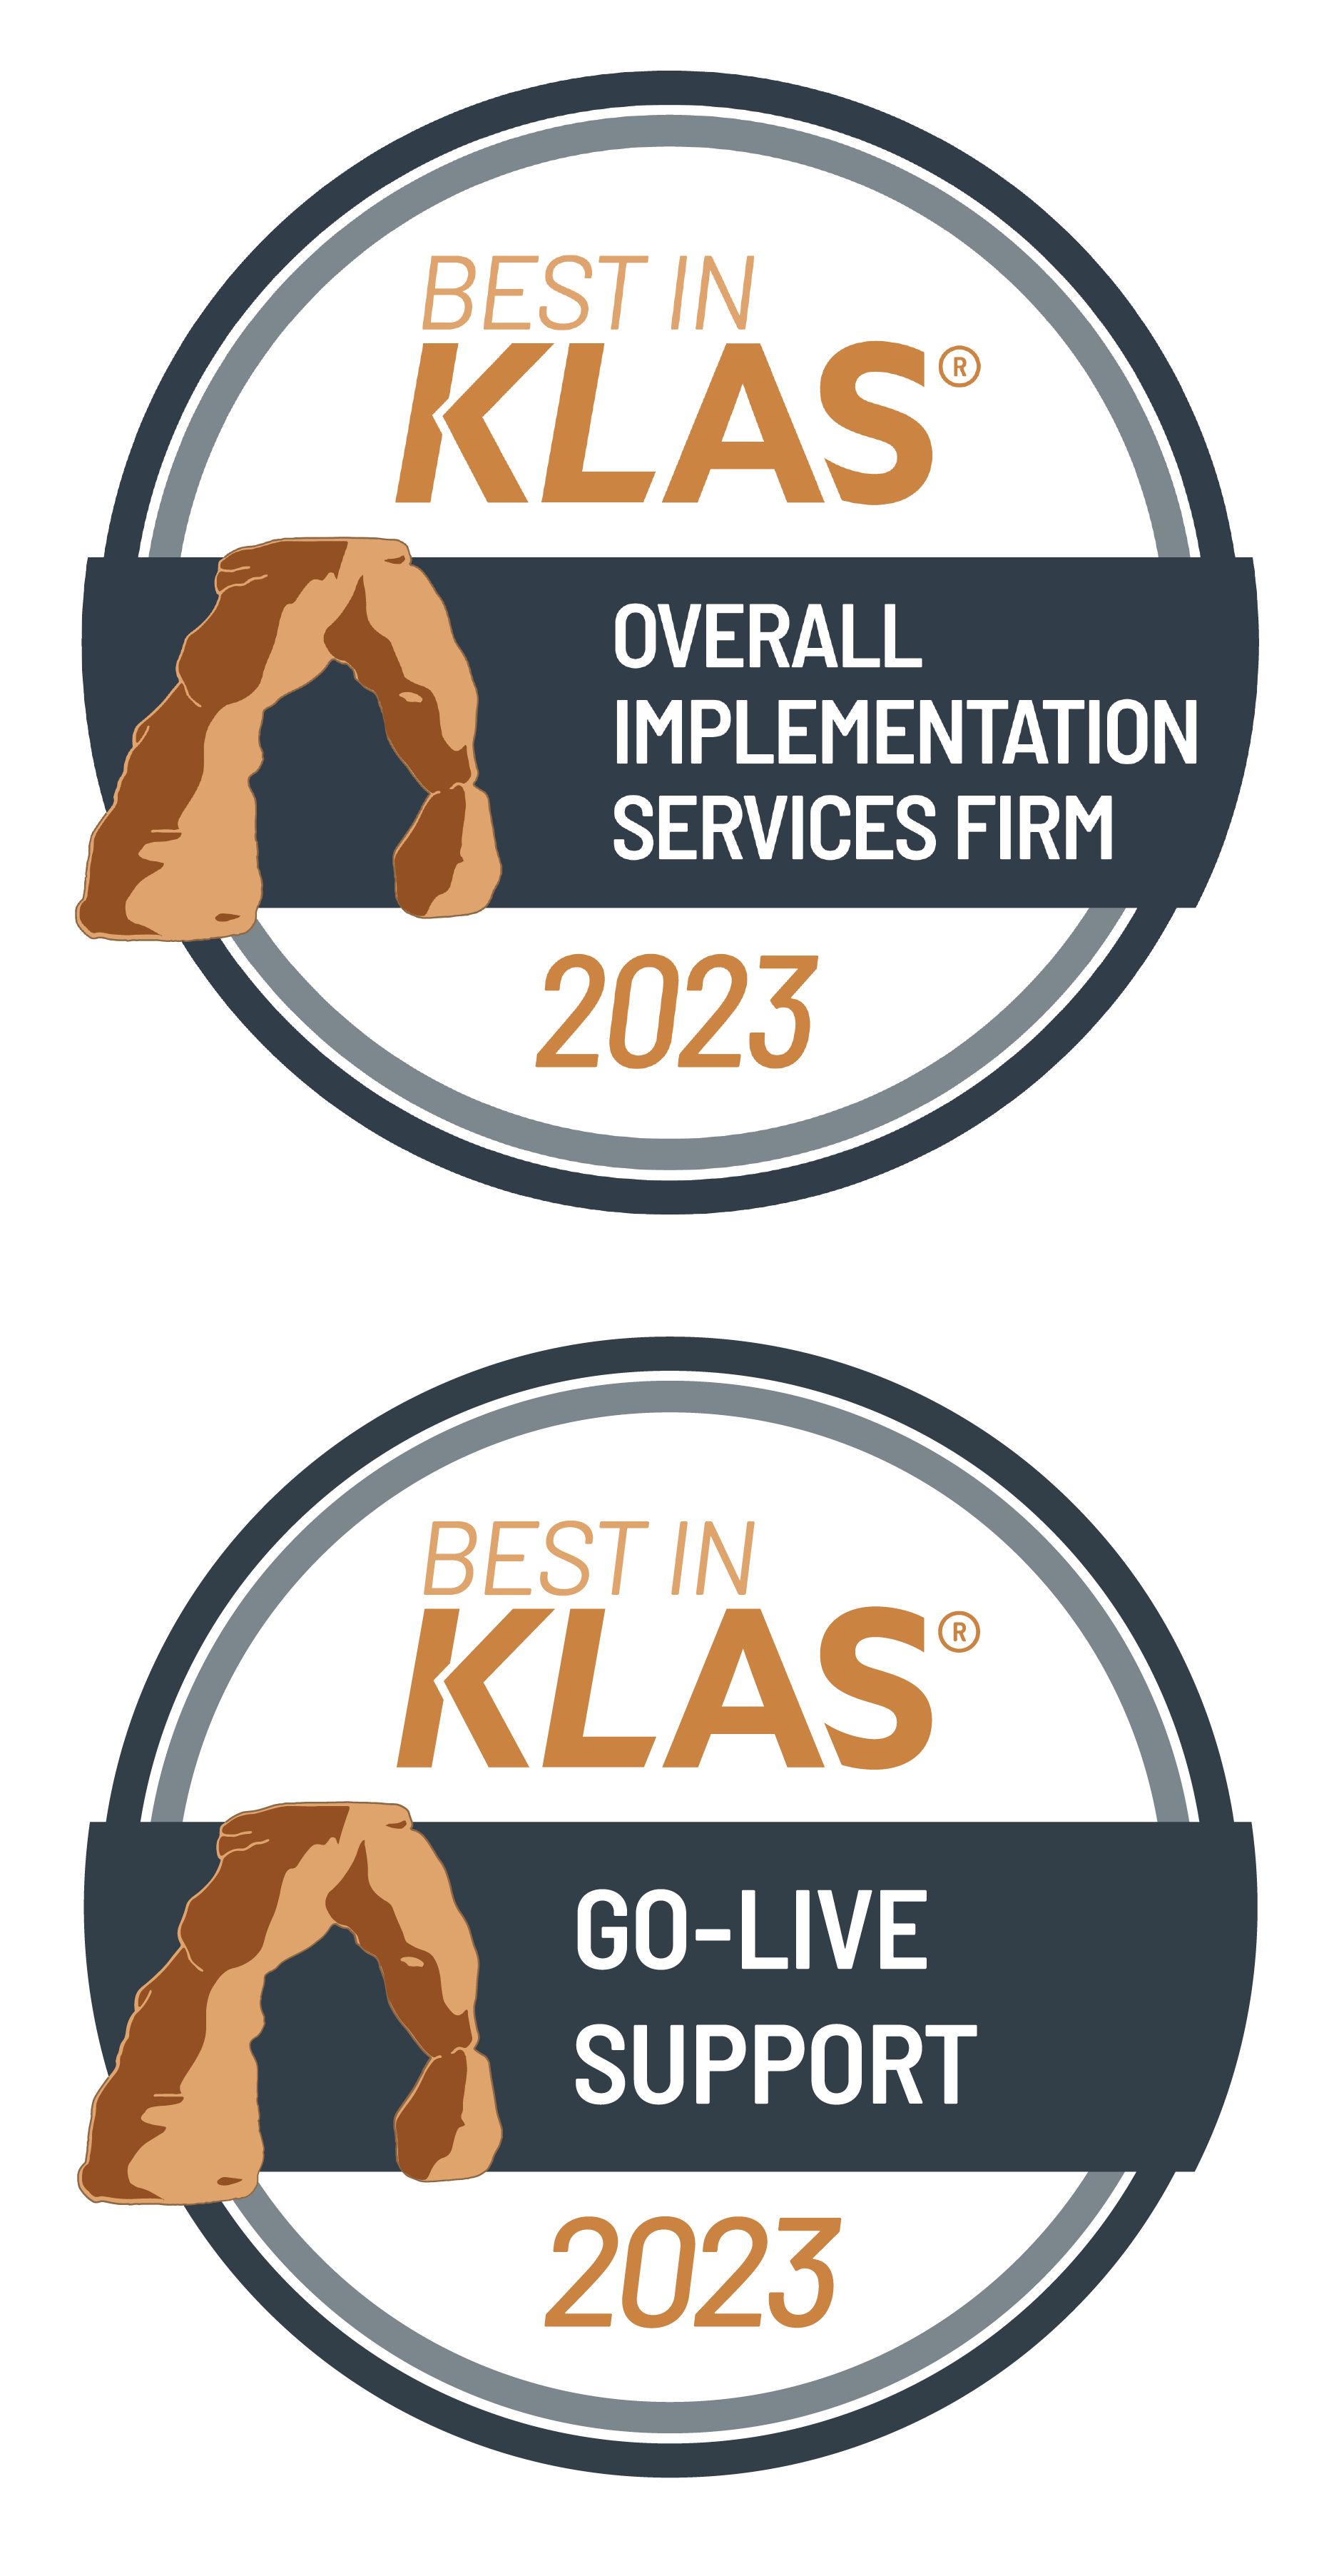 Best in Klas Overall Implementation Services Firm and Go-Live Support